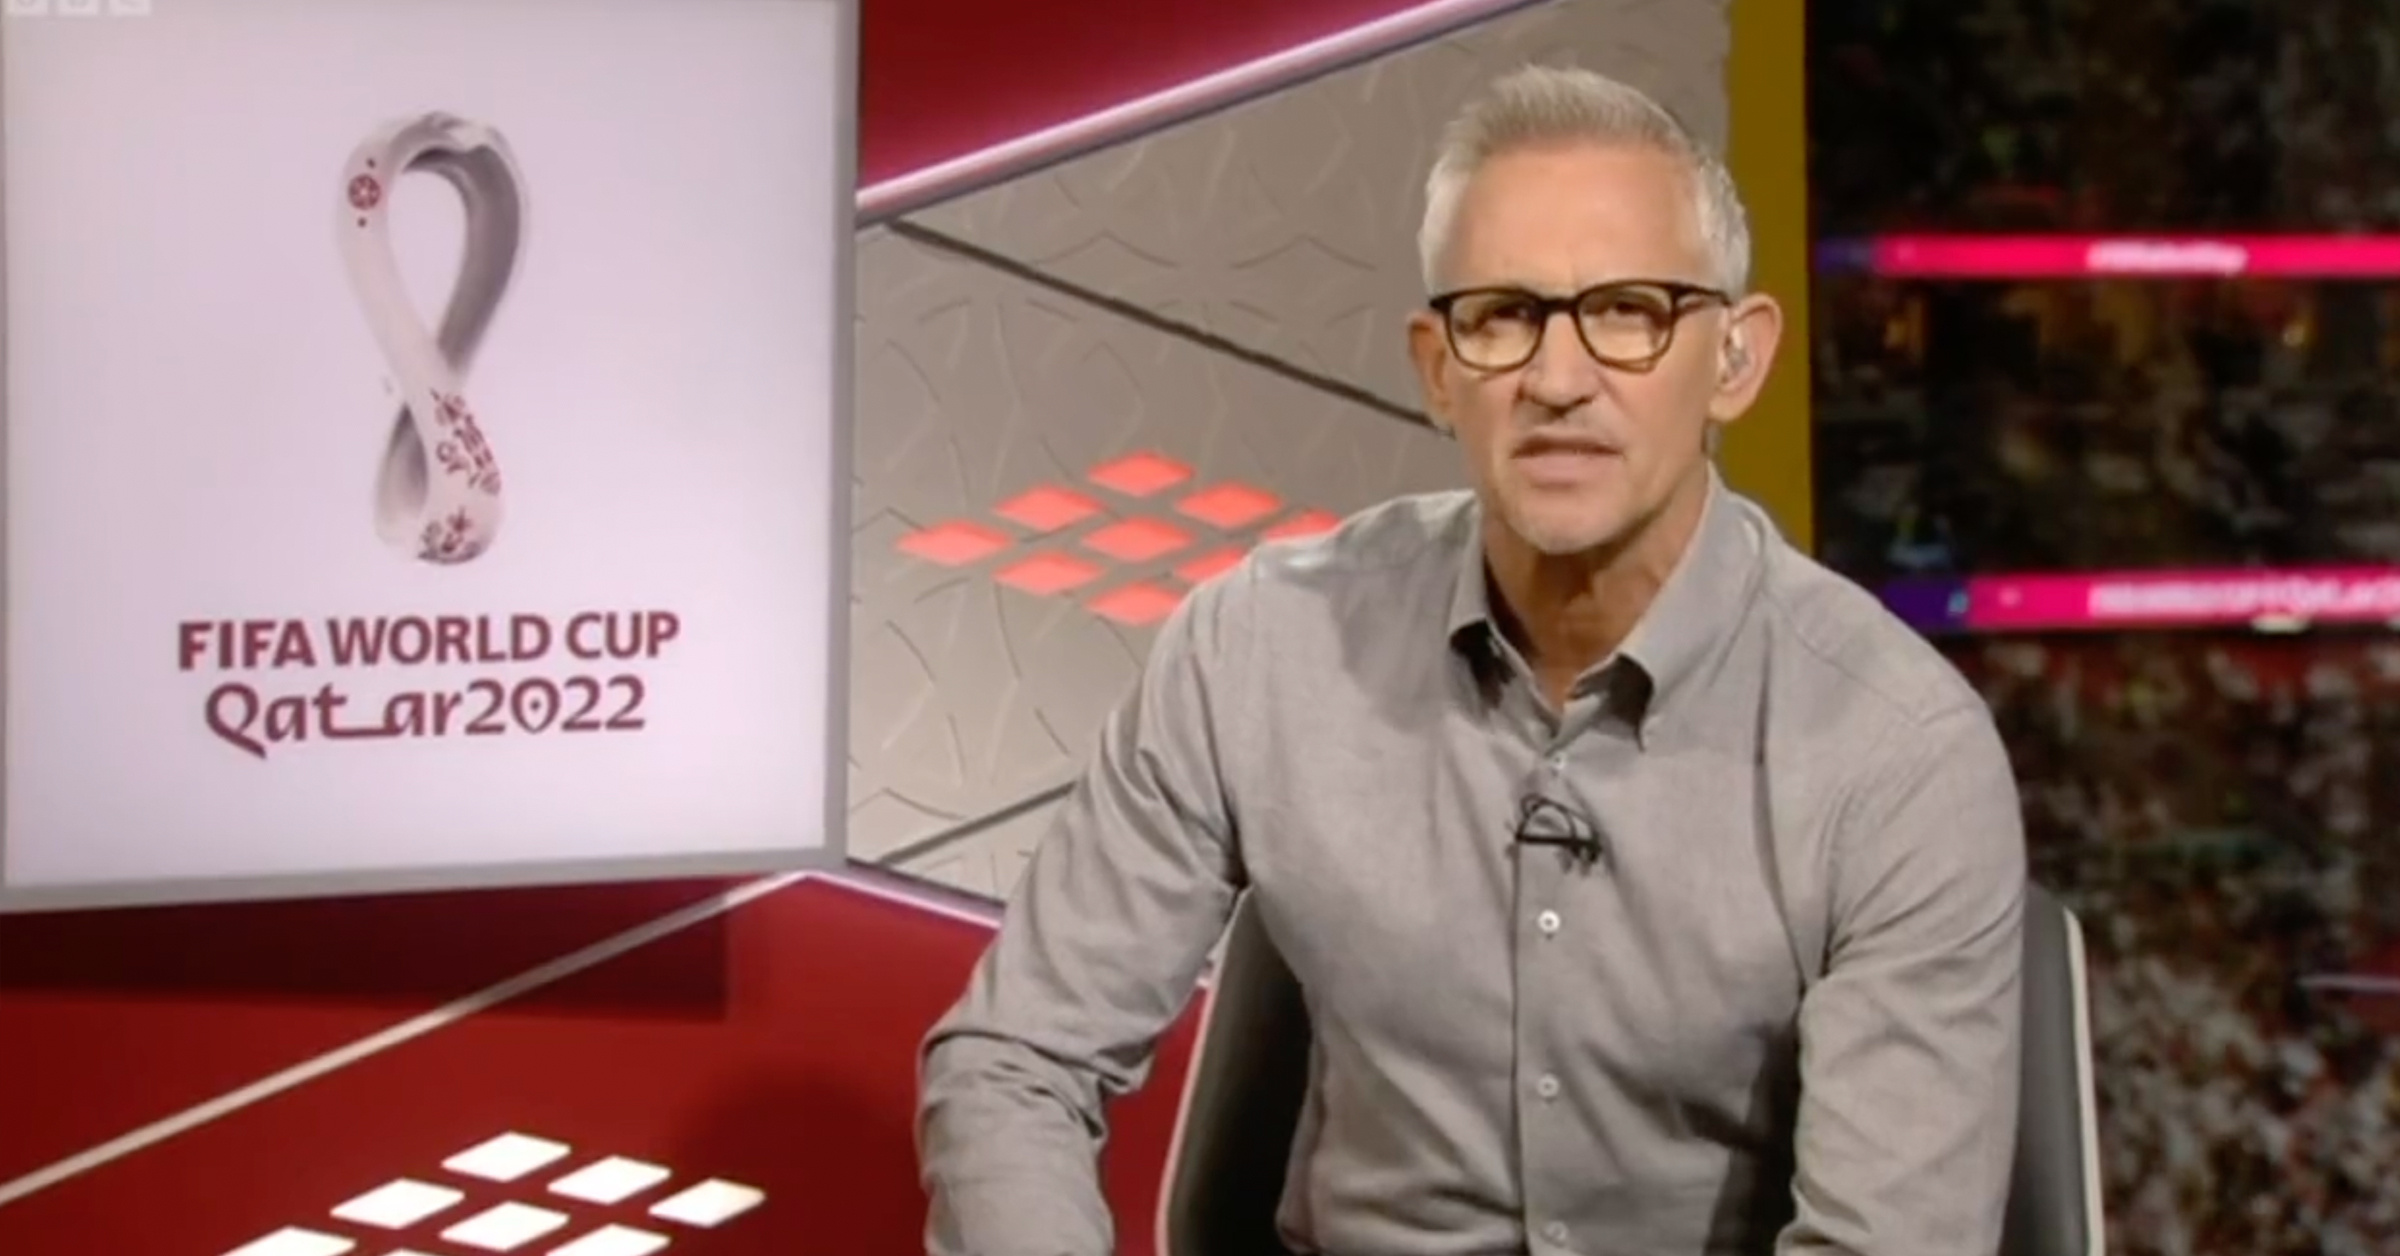 Gary Lineker applauded for his opening monologue of BBC's World Cup